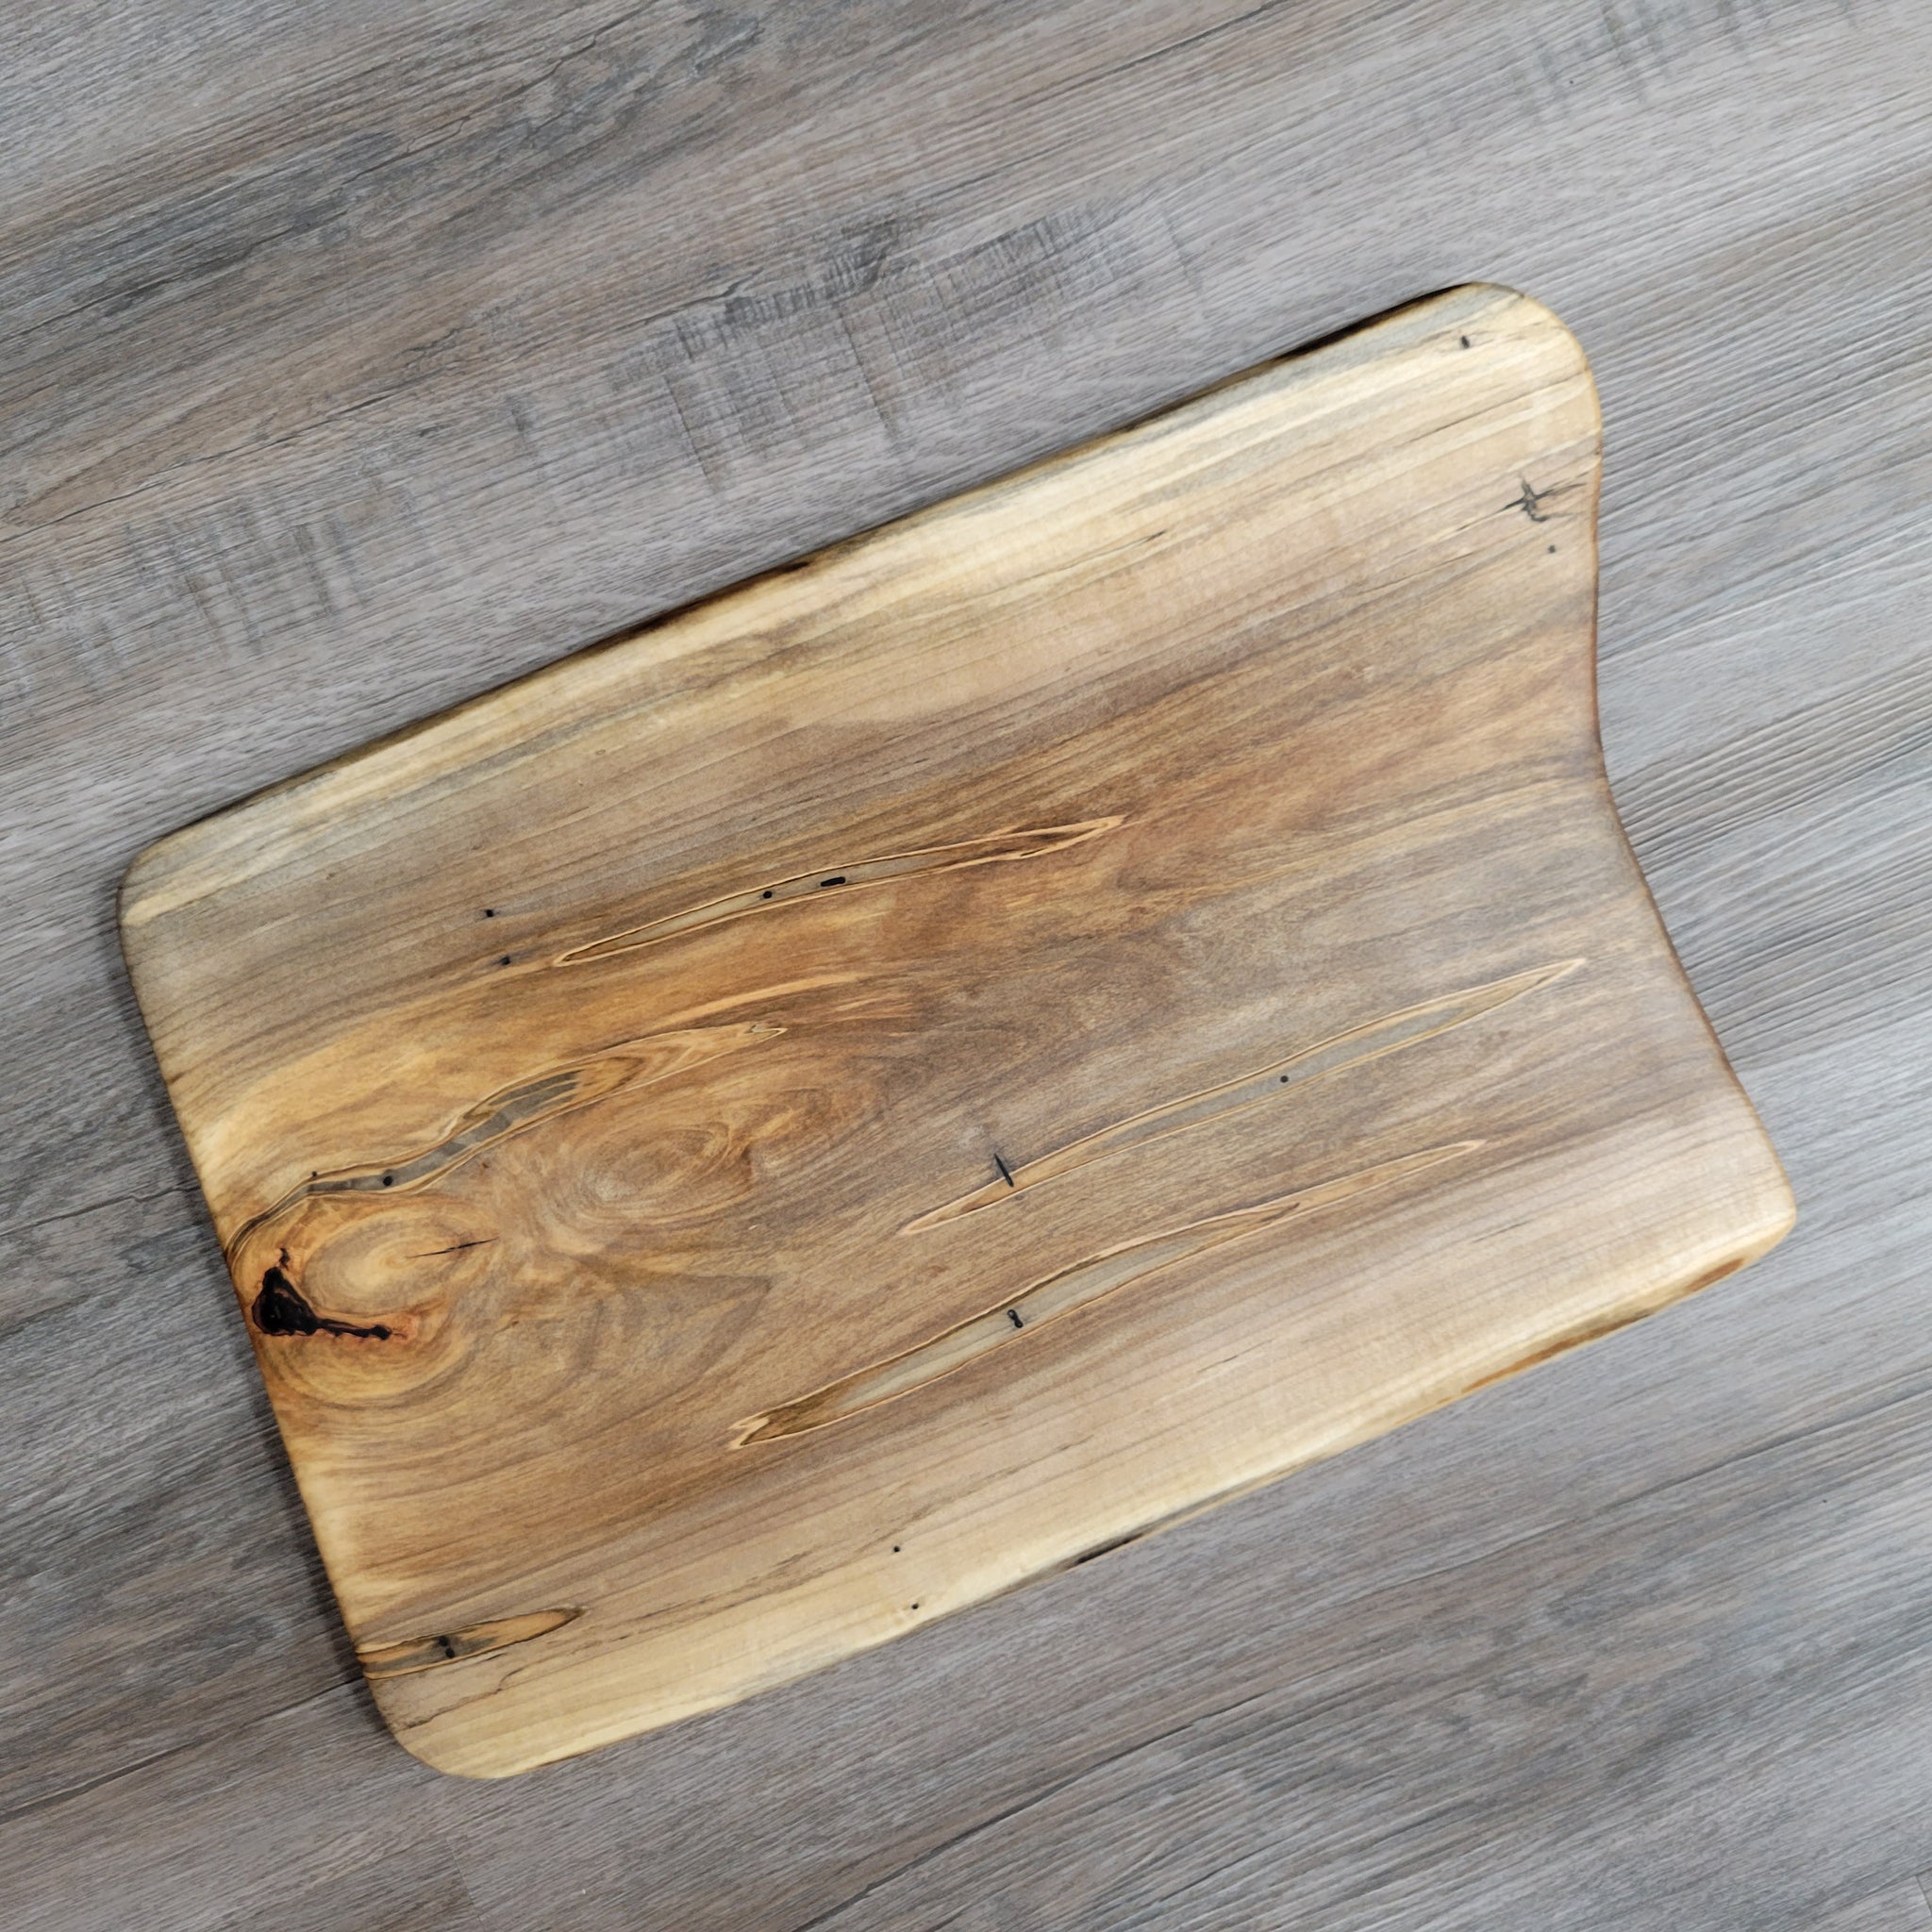 Maple Charcuterie Board made by Brandon Shealy